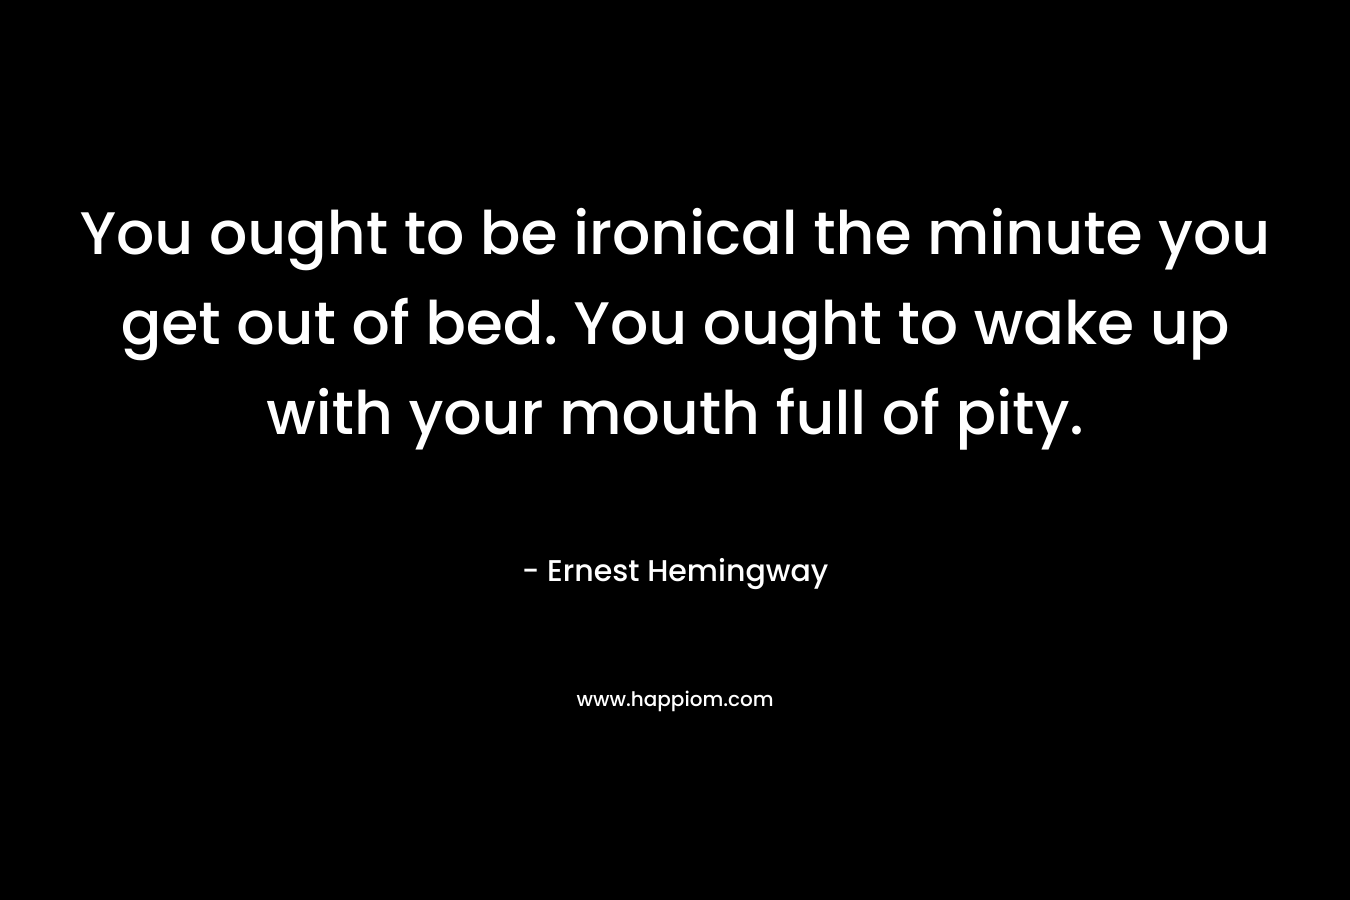 You ought to be ironical the minute you get out of bed. You ought to wake up with your mouth full of pity. – Ernest Hemingway